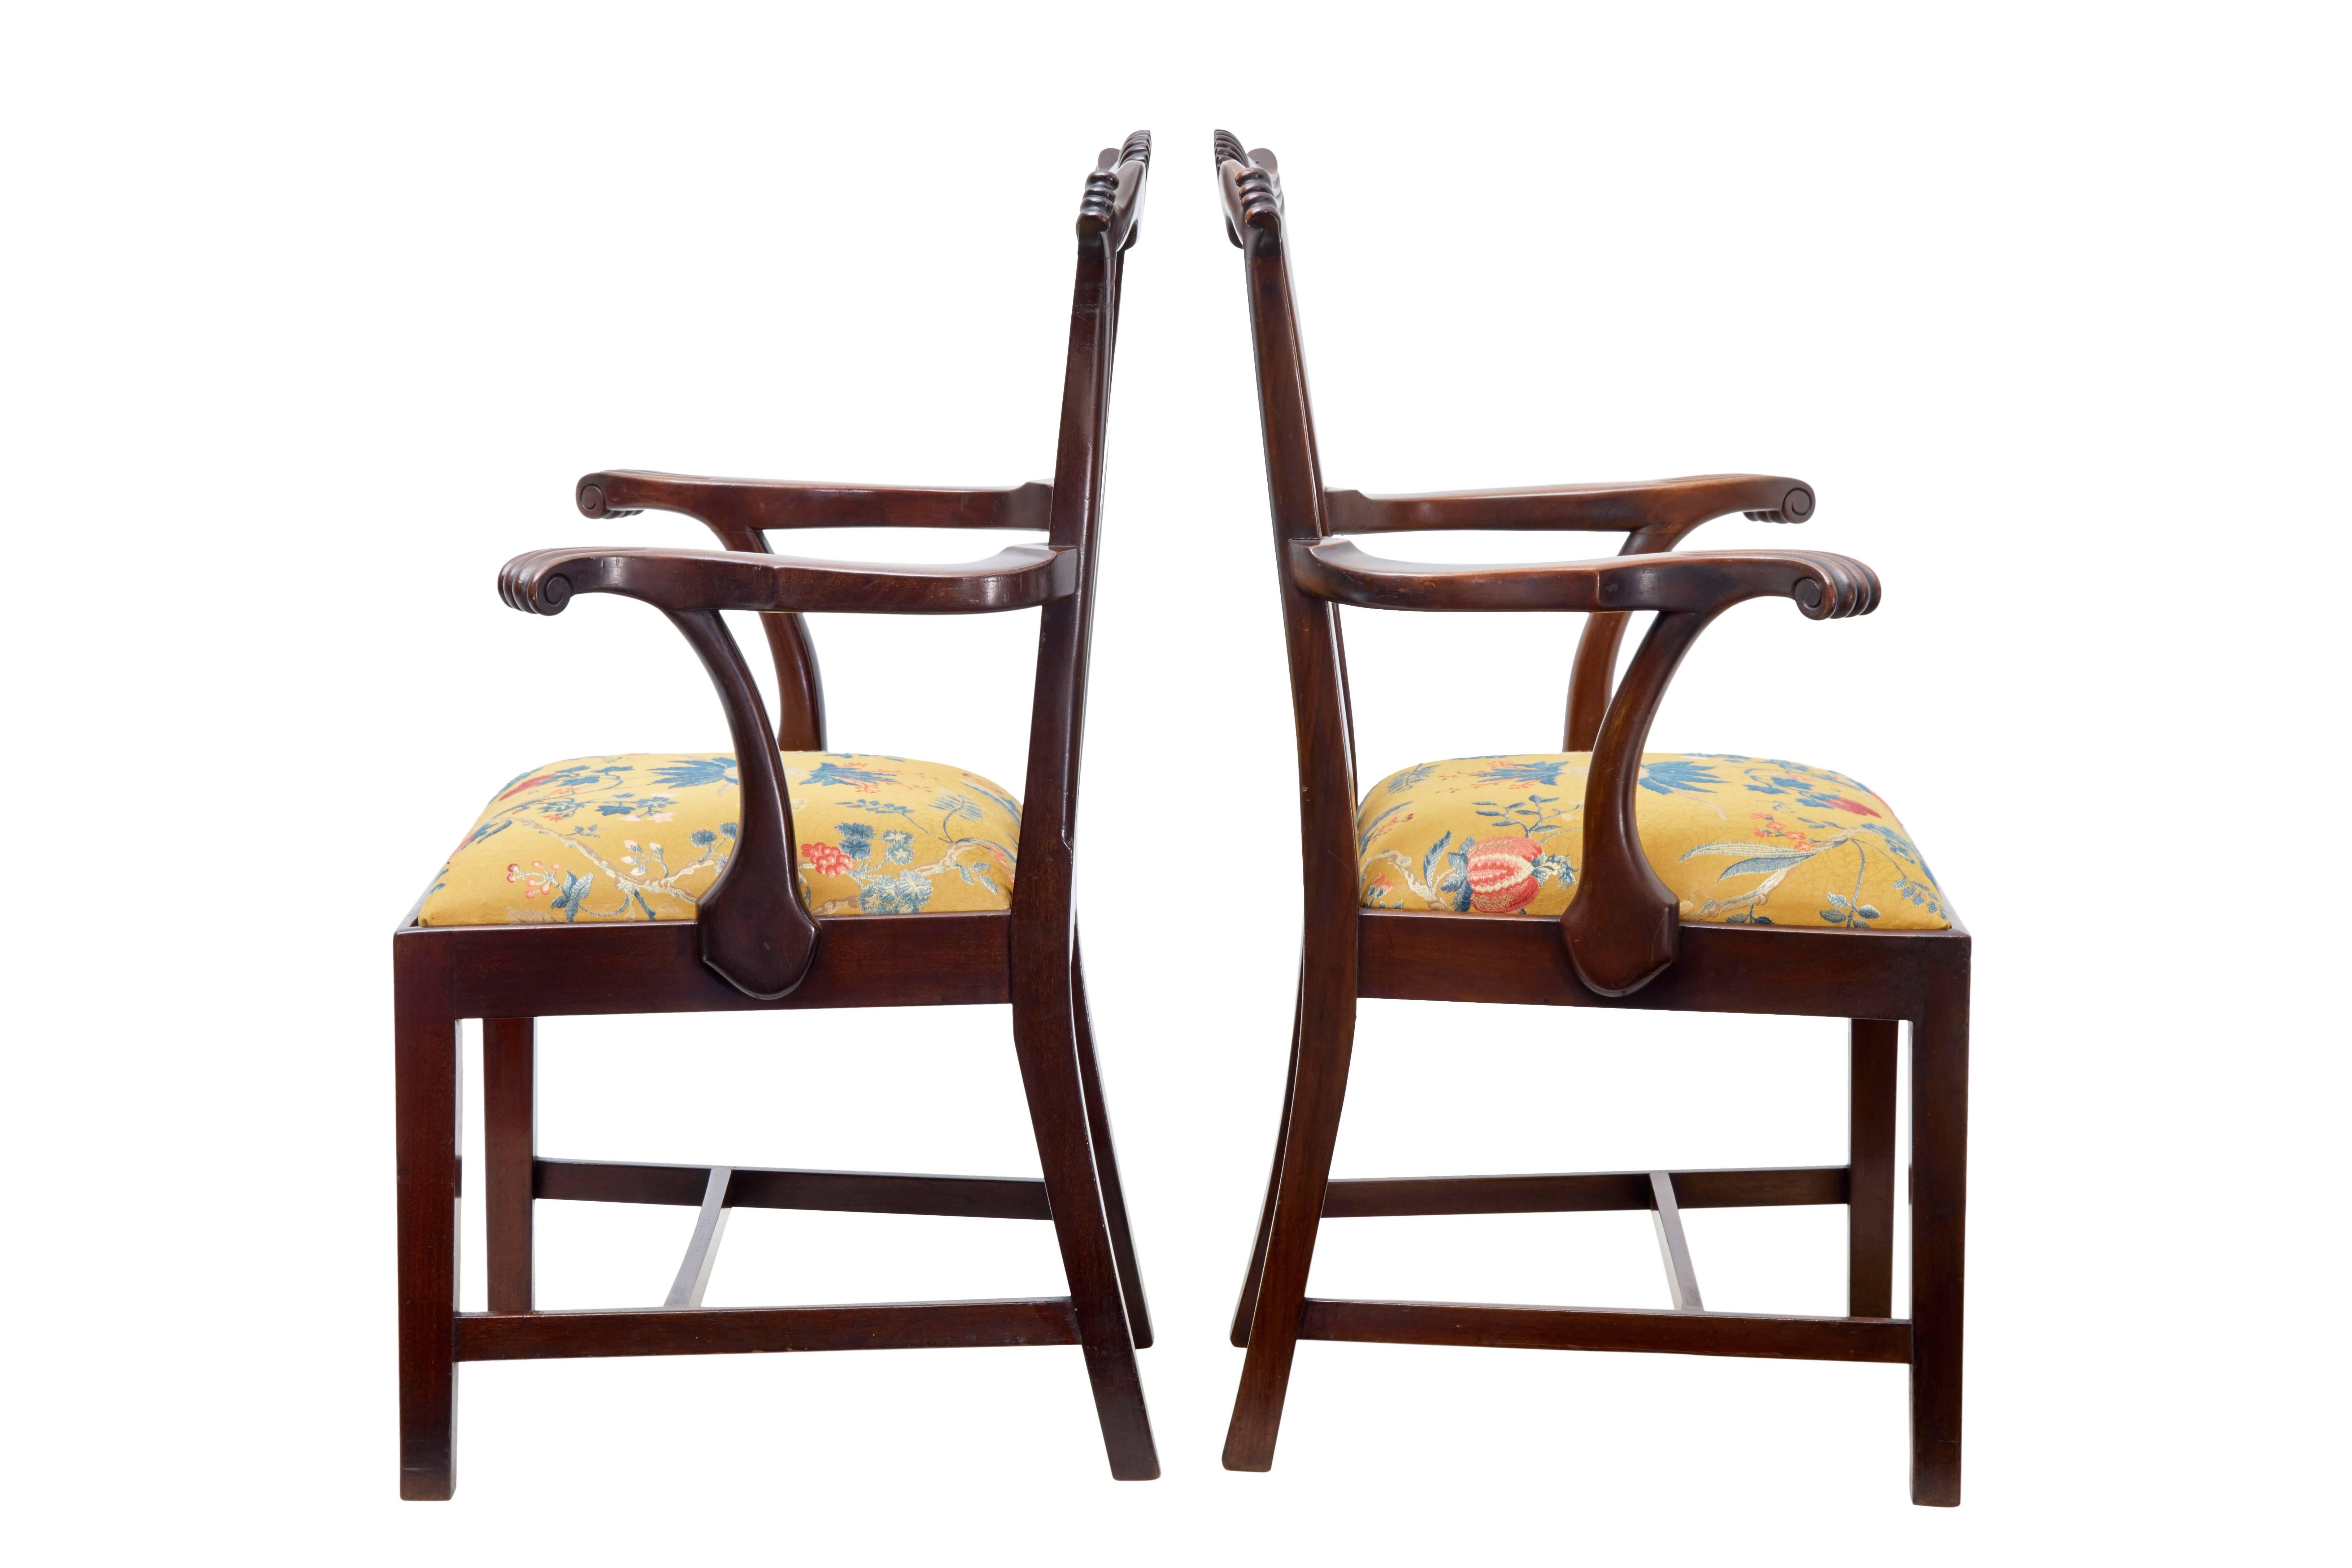 Fine pair of late 19th century armchairs in the Chippendale taste, circa 1880.
Beautifully carved backs and scrolled arms.
Drop in seats richly upholstered.
Straight legs united by stretcher.

Measures: Seat height 18 1/2